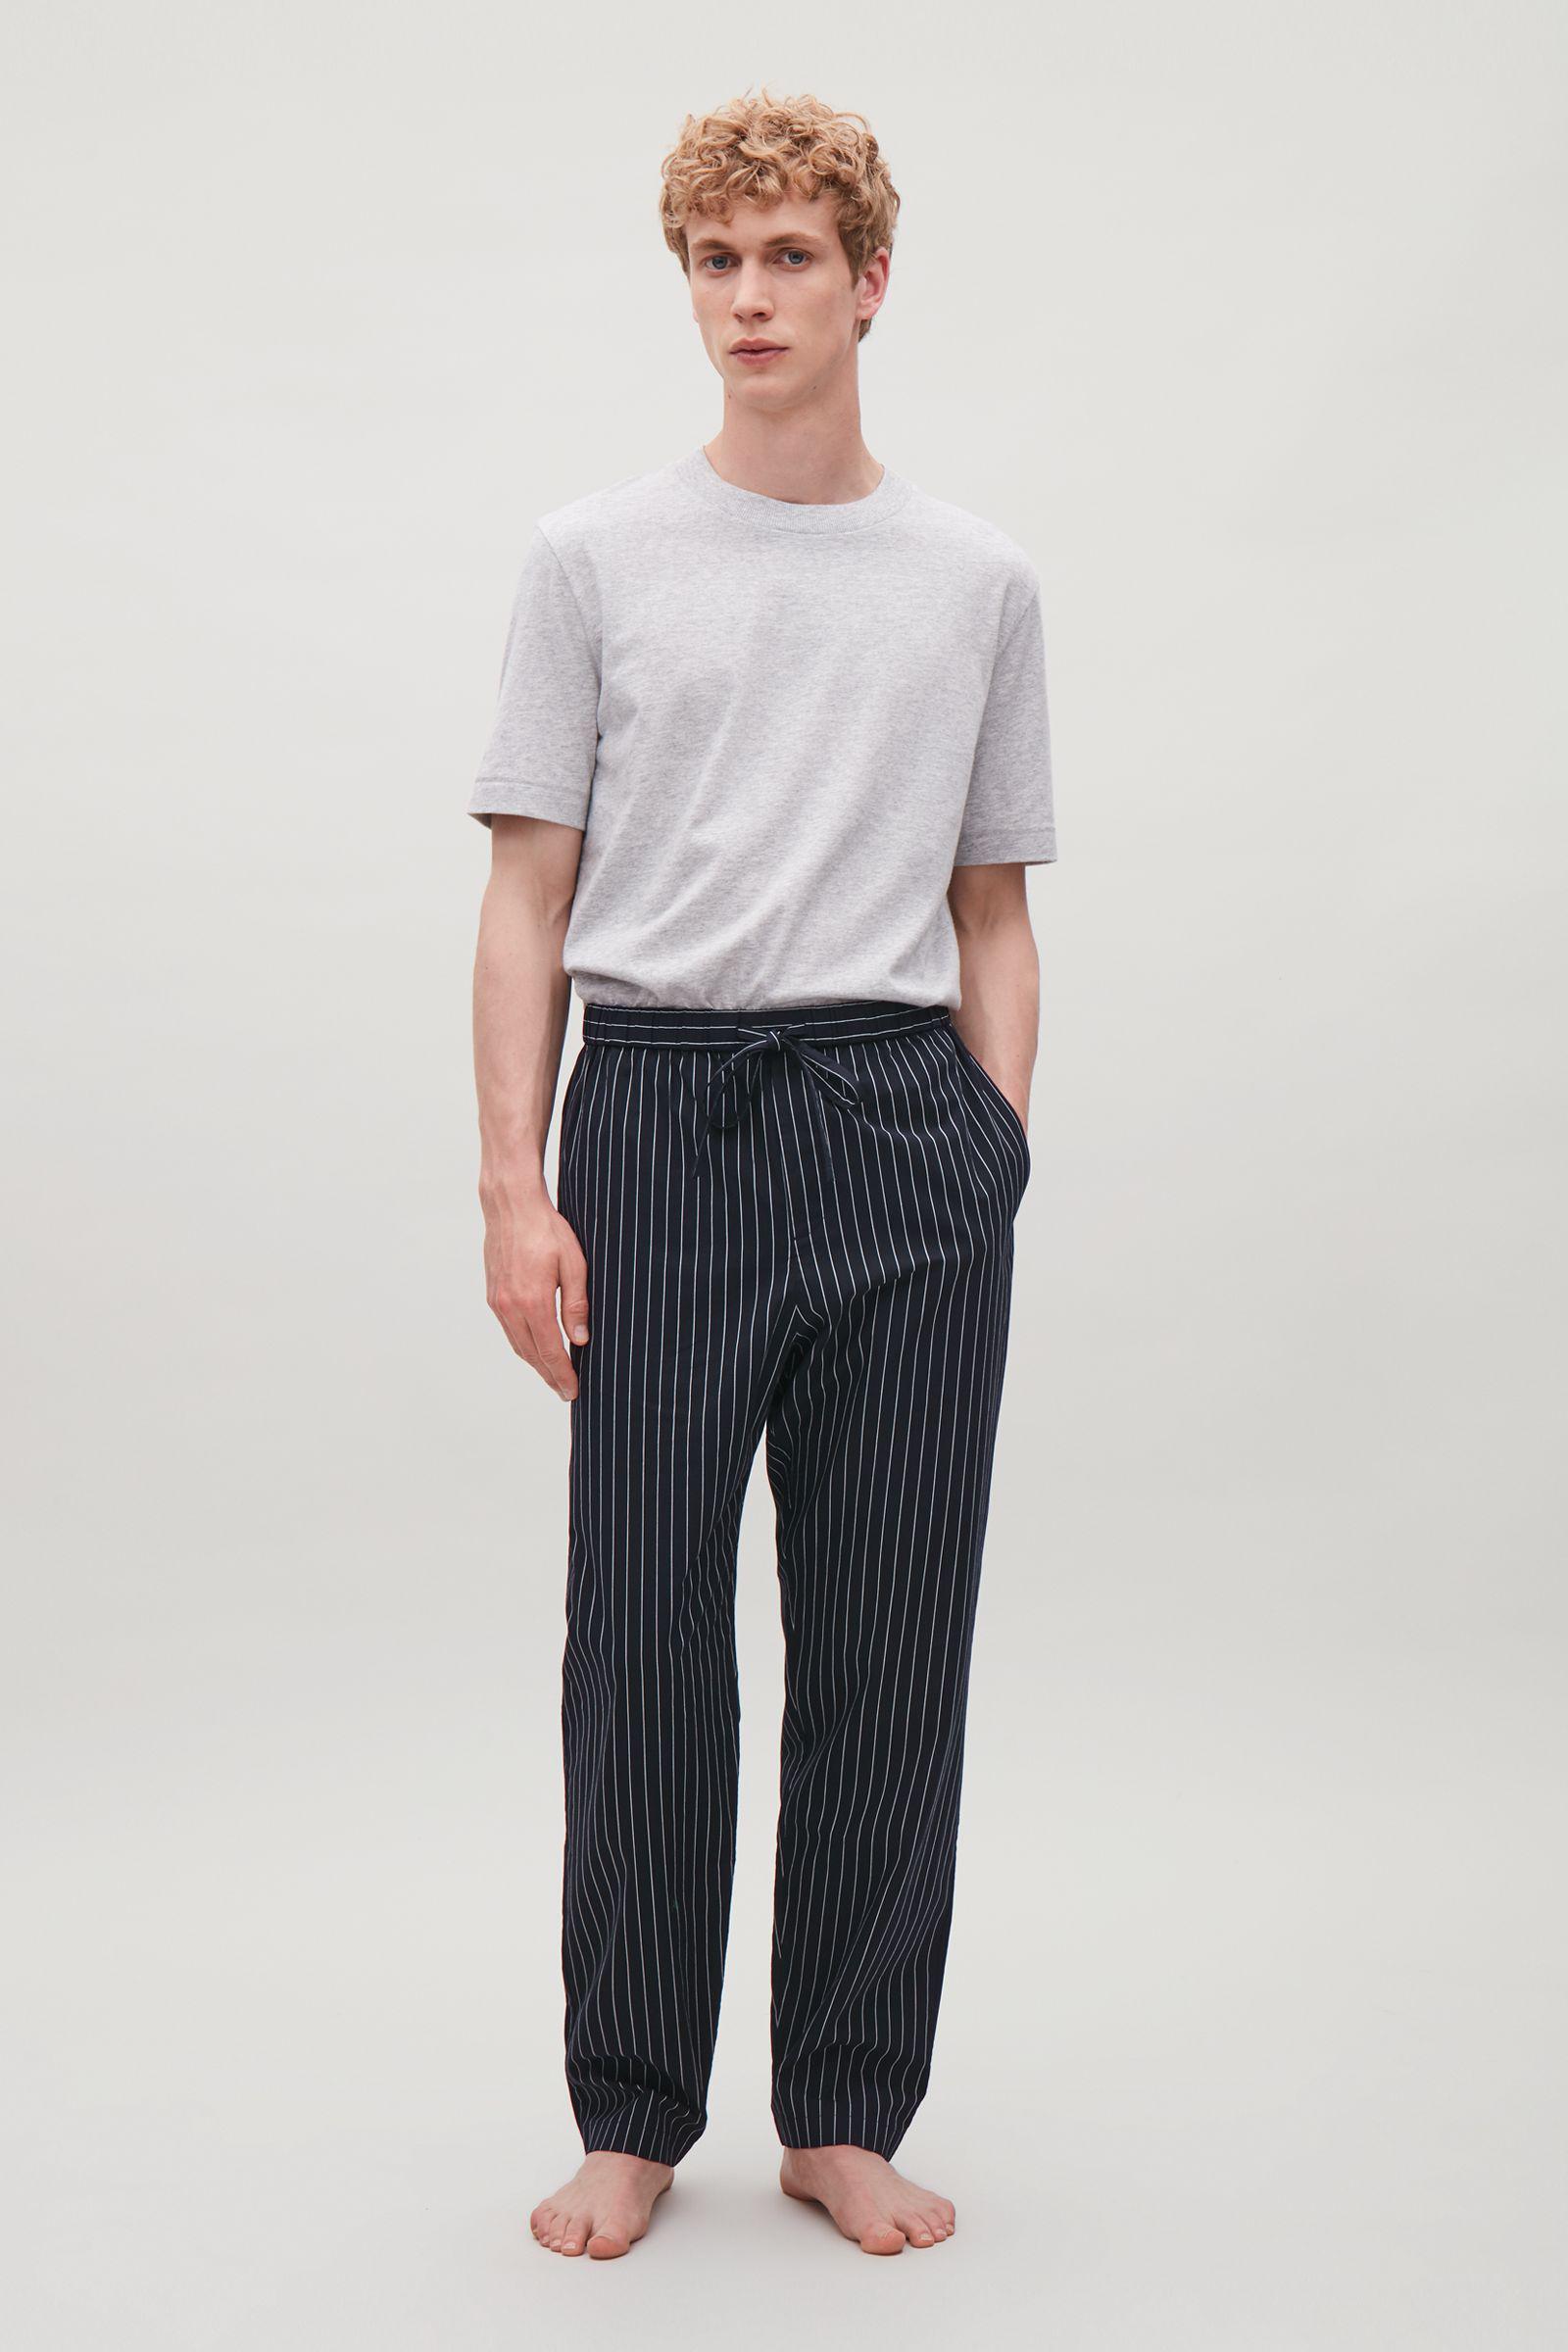 COS Cotton Striped Pyjama Bottoms in Navy (Blue) for Men - Lyst